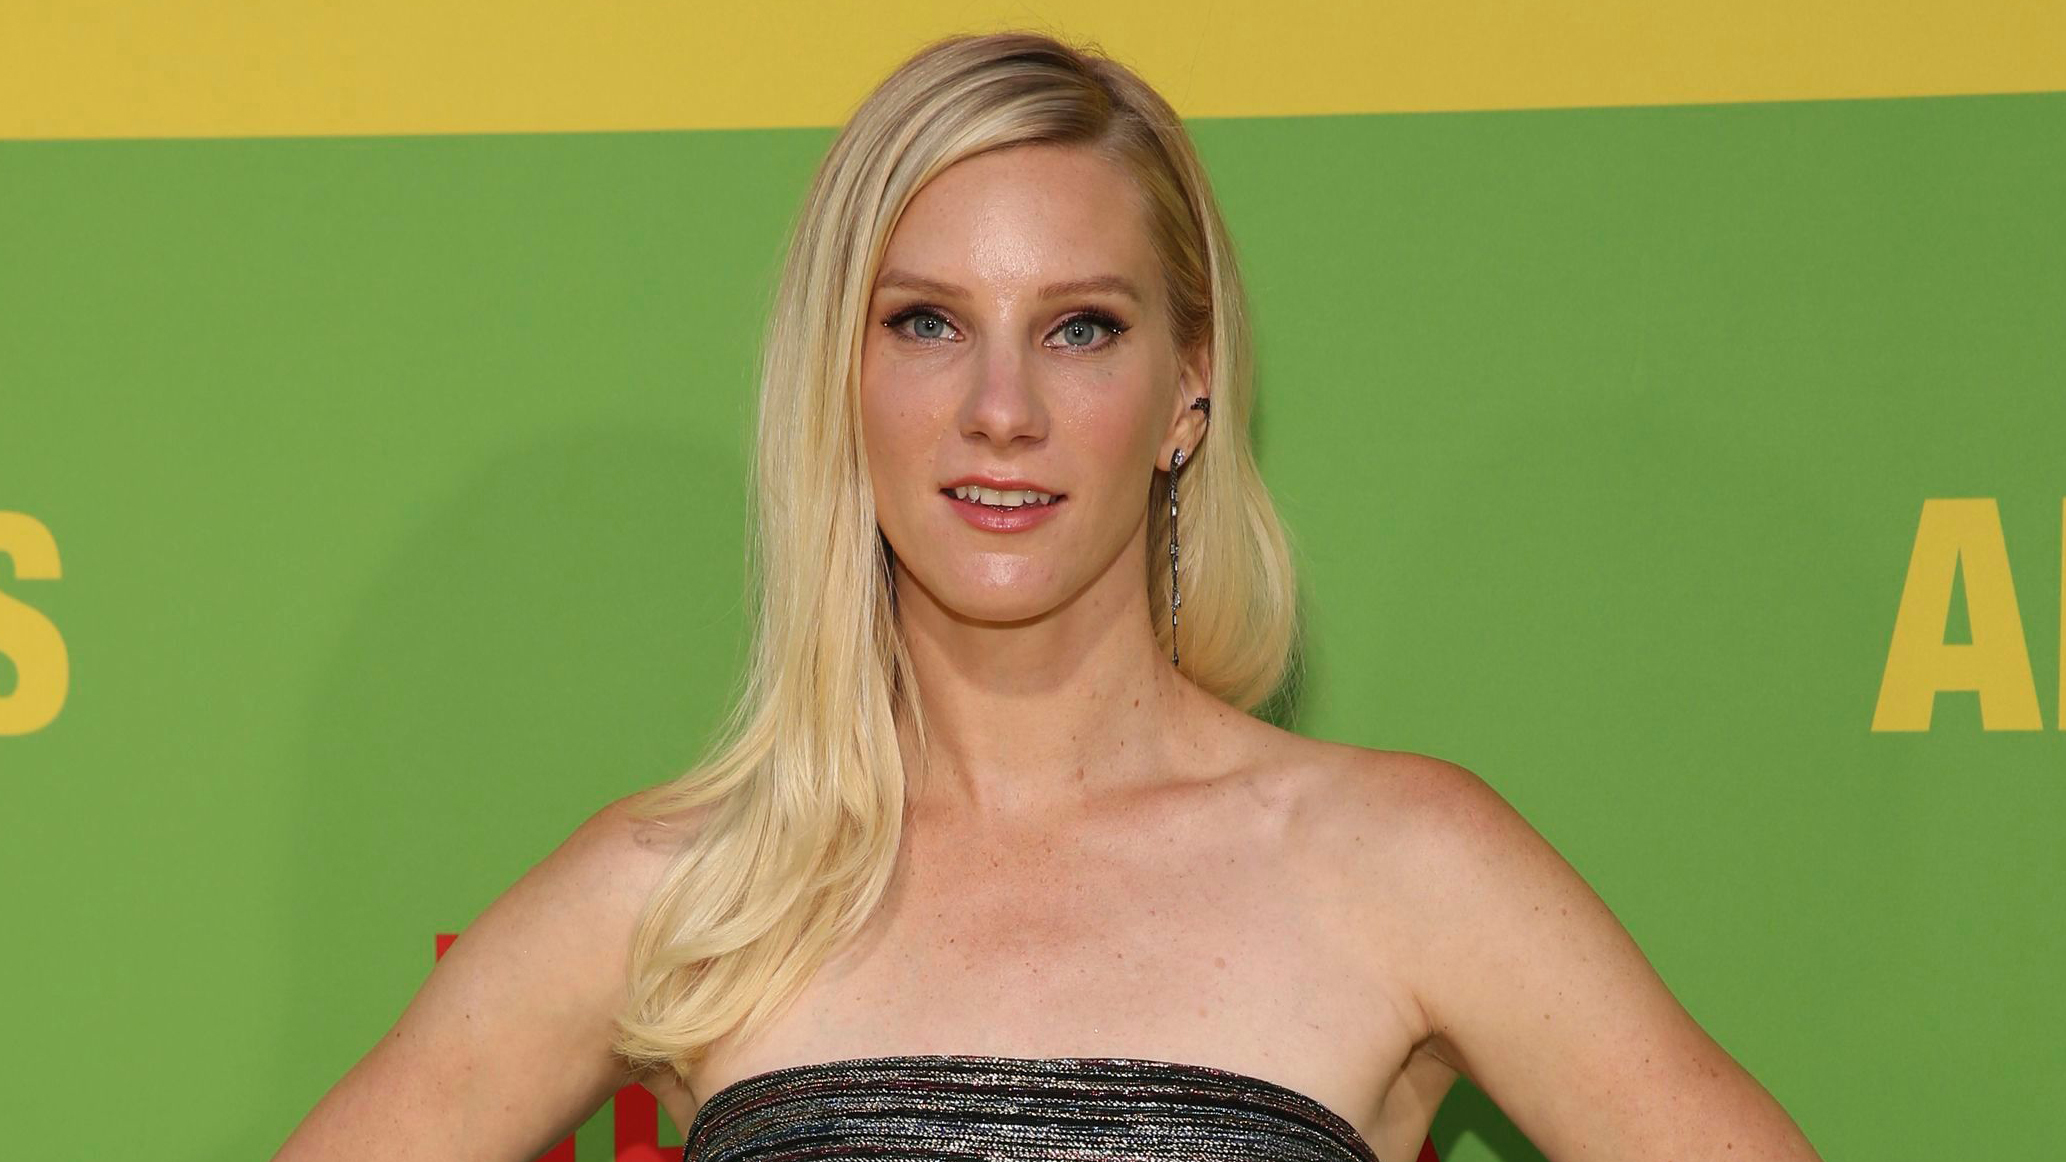 Heather Morris arrives at the premiere of "Always Be My Maybe", at the Regency Village Theatre in Los AngelesLA Premiere of "Always Be My Maybe", Los Angeles, USA - 22 May 2019